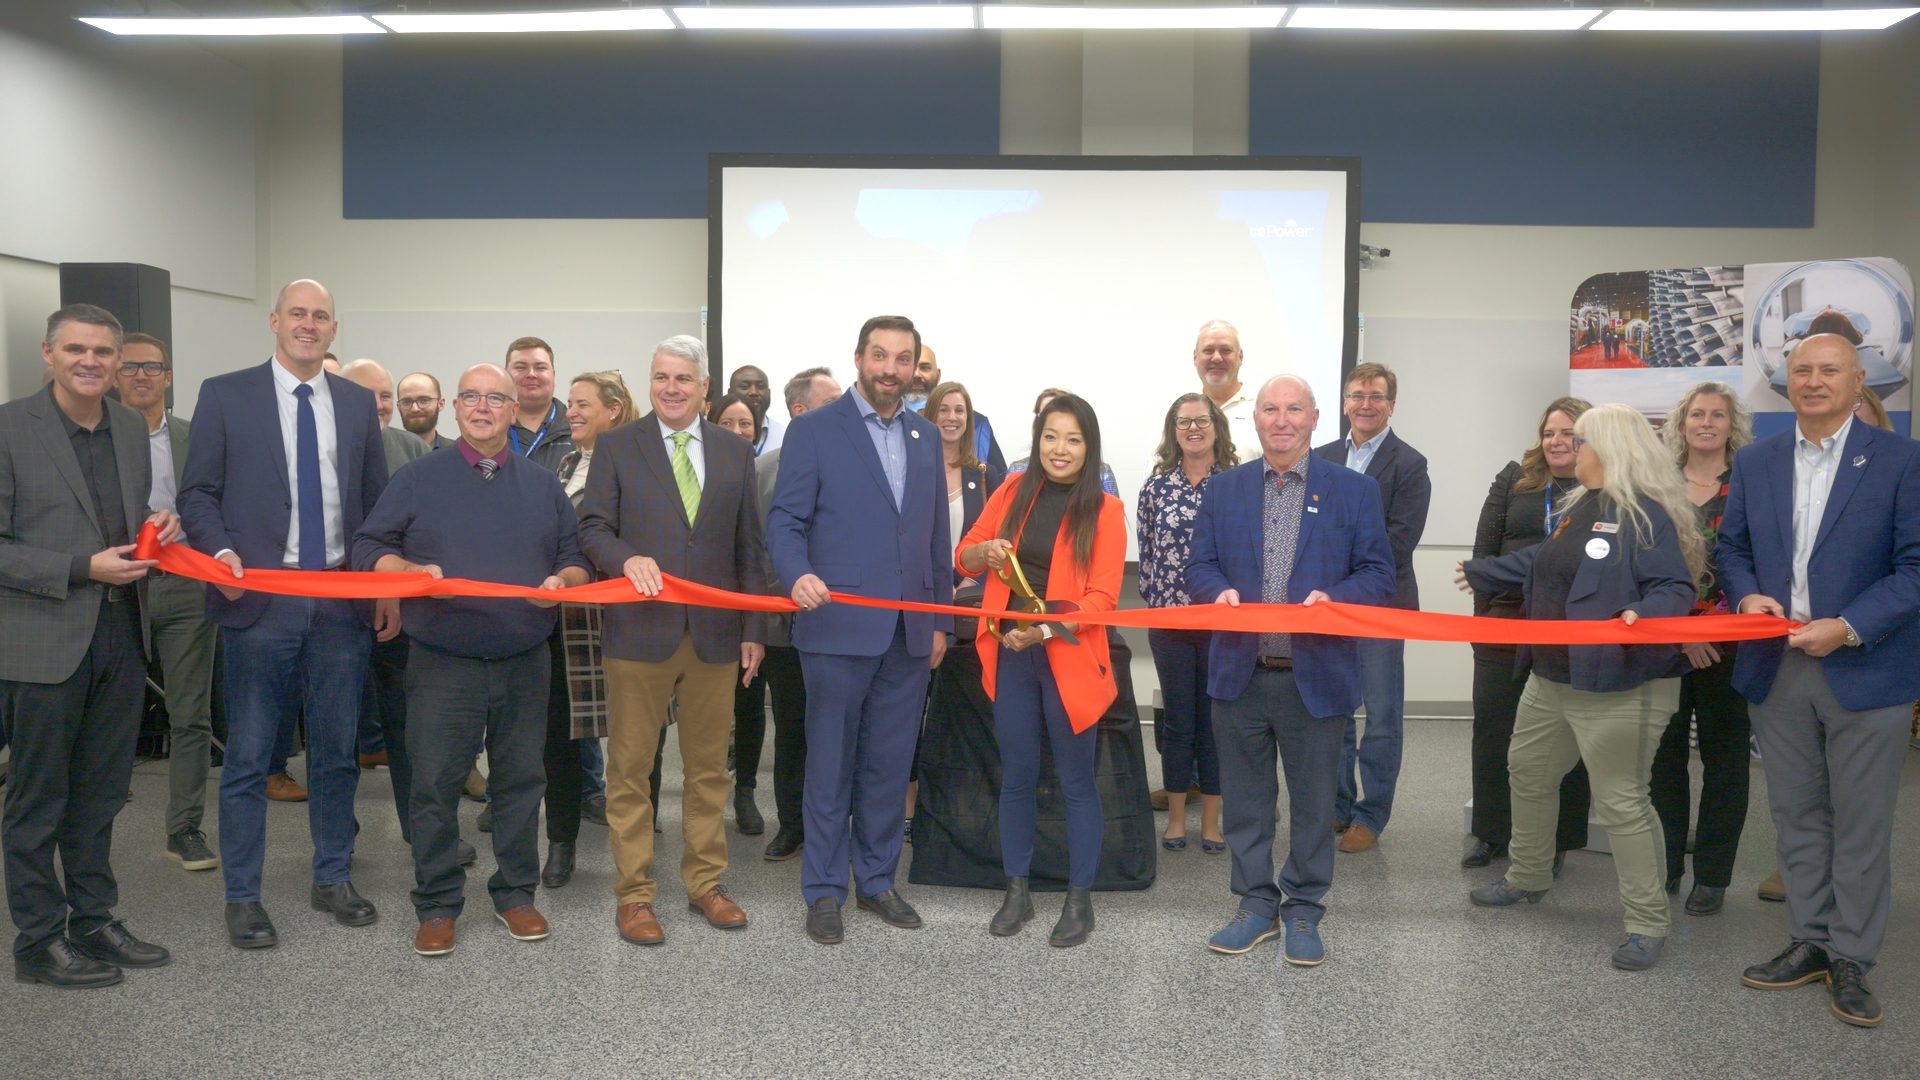 Bruce Power and local dignitaries cut the ribbon to open the new Bruce C project office Nov. 15 in Port Elgin.